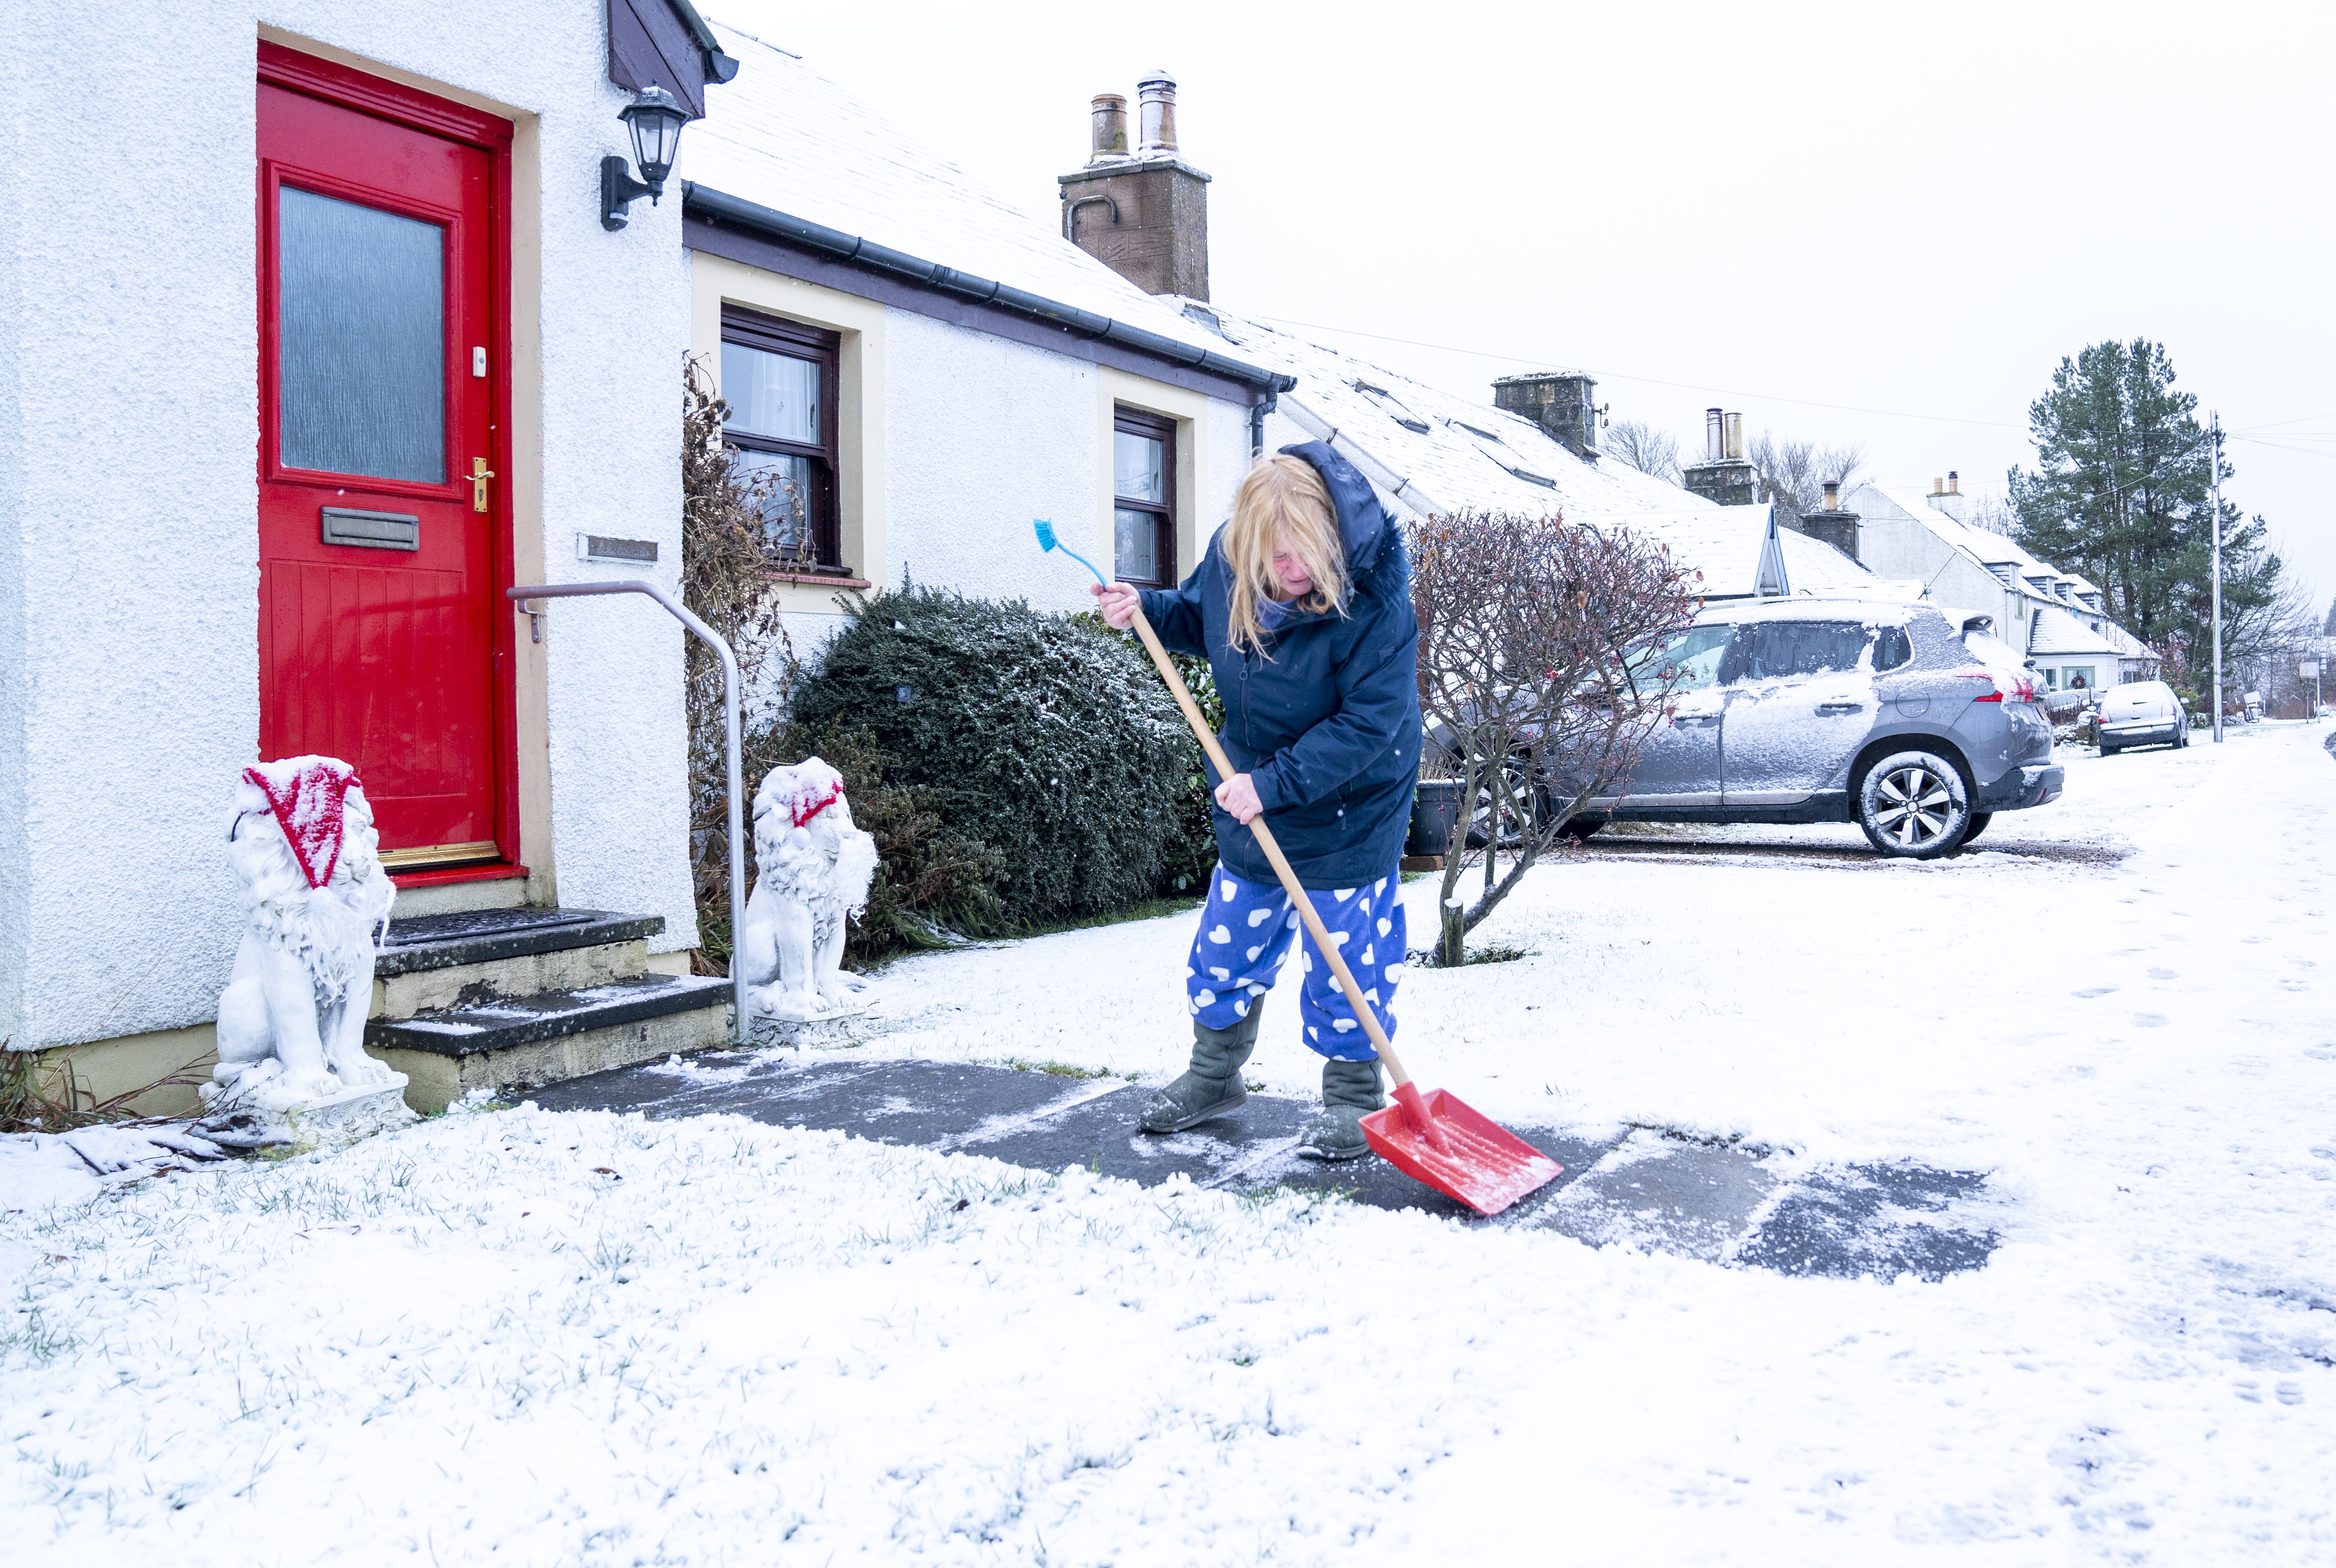 Snowy and icy conditions carry health risks for many (Pictured: Snow in the borders region on 26 December)